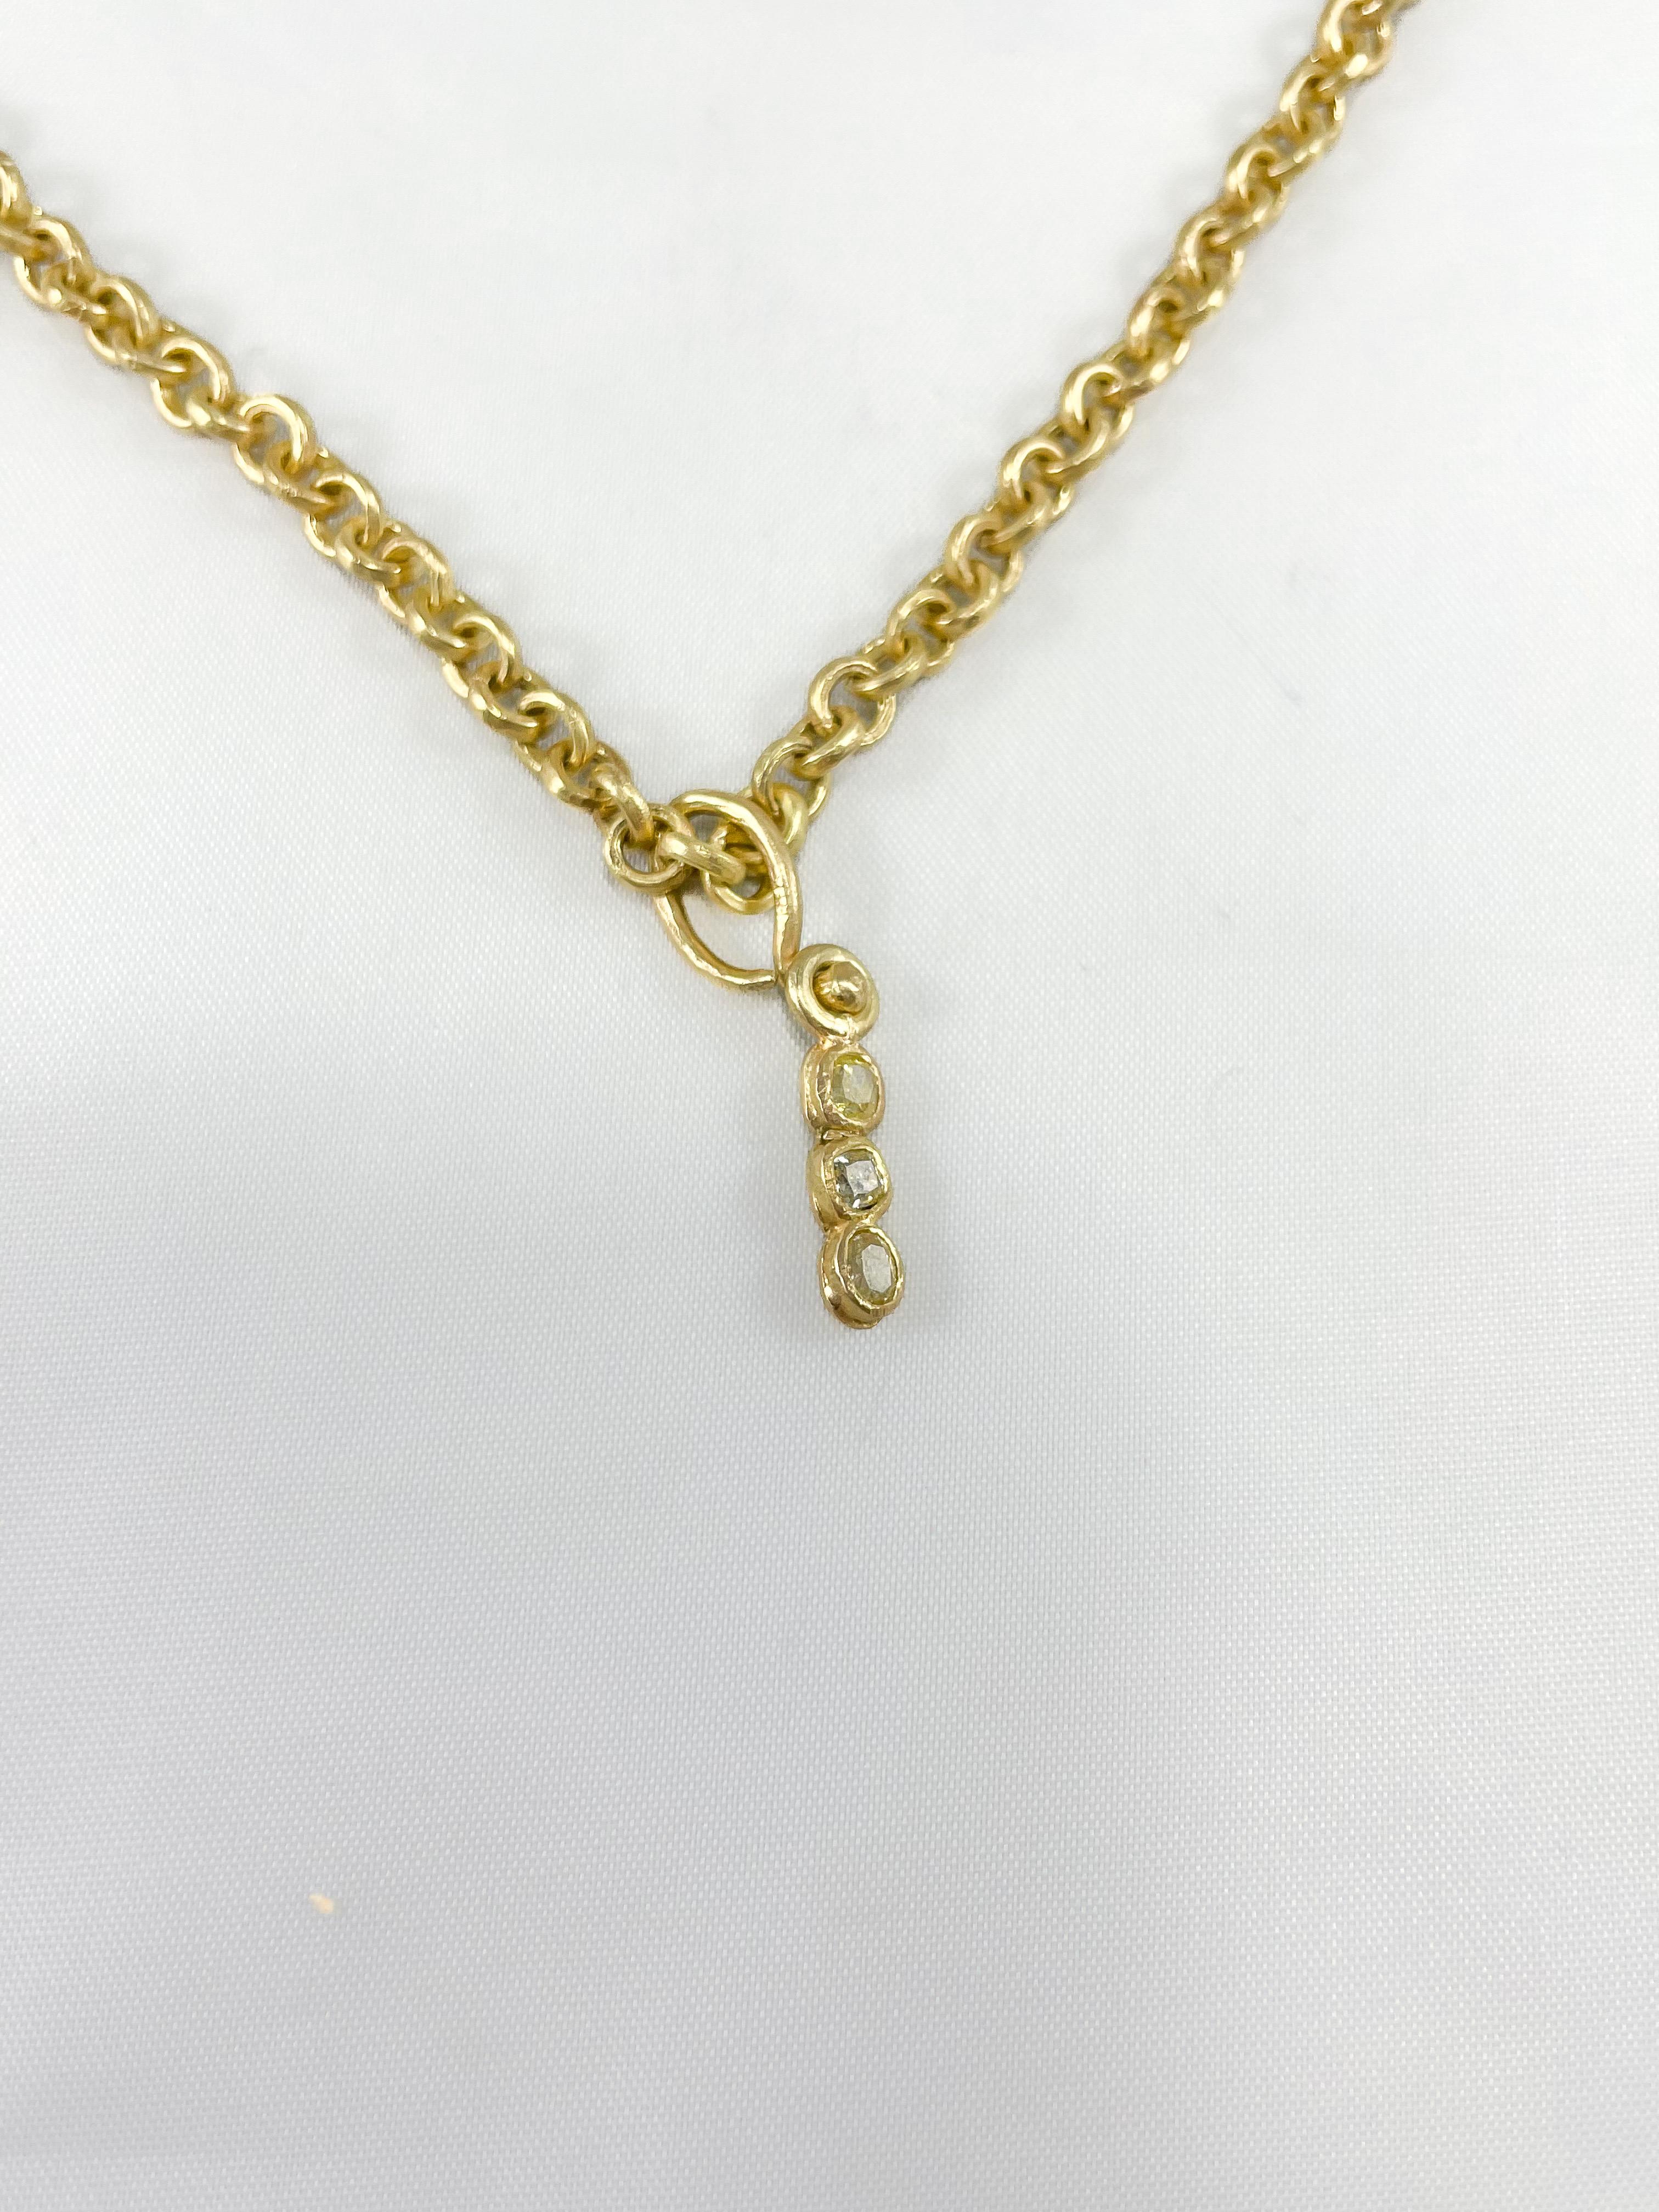 A substantial link chain choker handcrafted in recycled 18K gold. The necklace is made up of round uniformly shaped links. 18